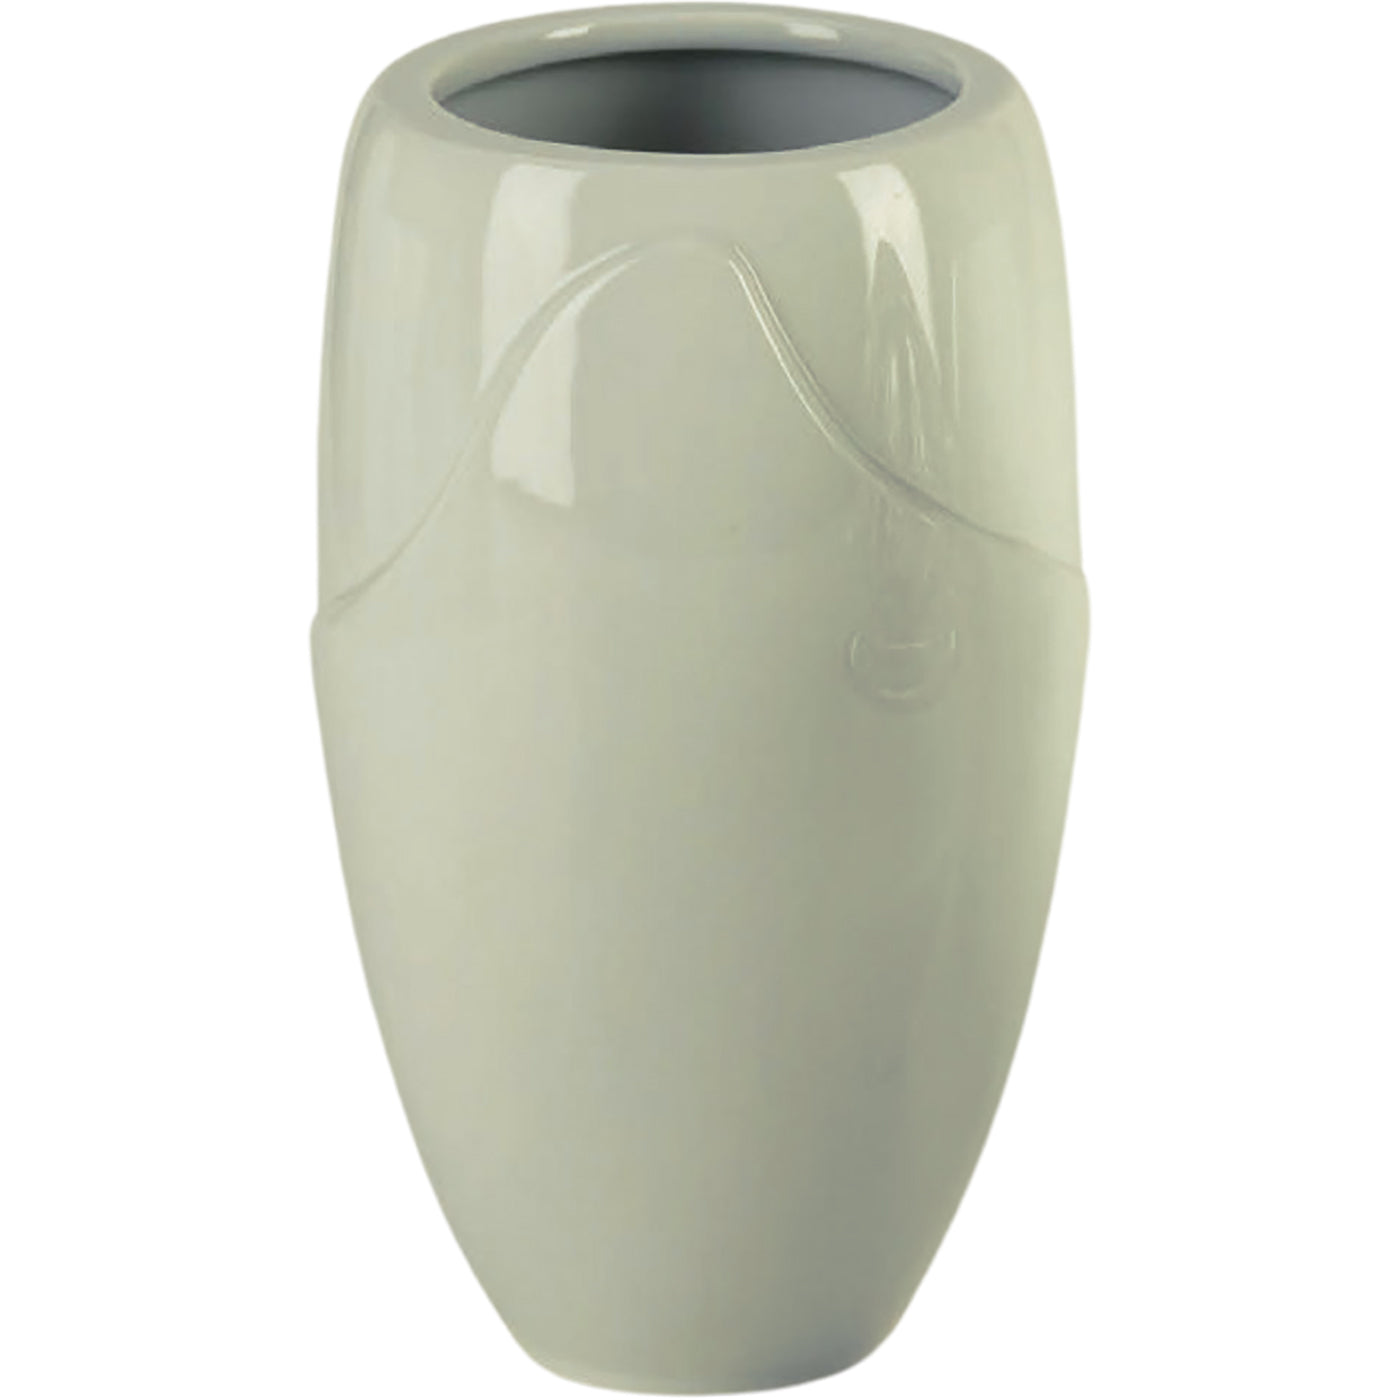 Grave vases Onda ivory 21x13cm - 8.3x5.1in In ivory porcelain, ground attached ON168T/A